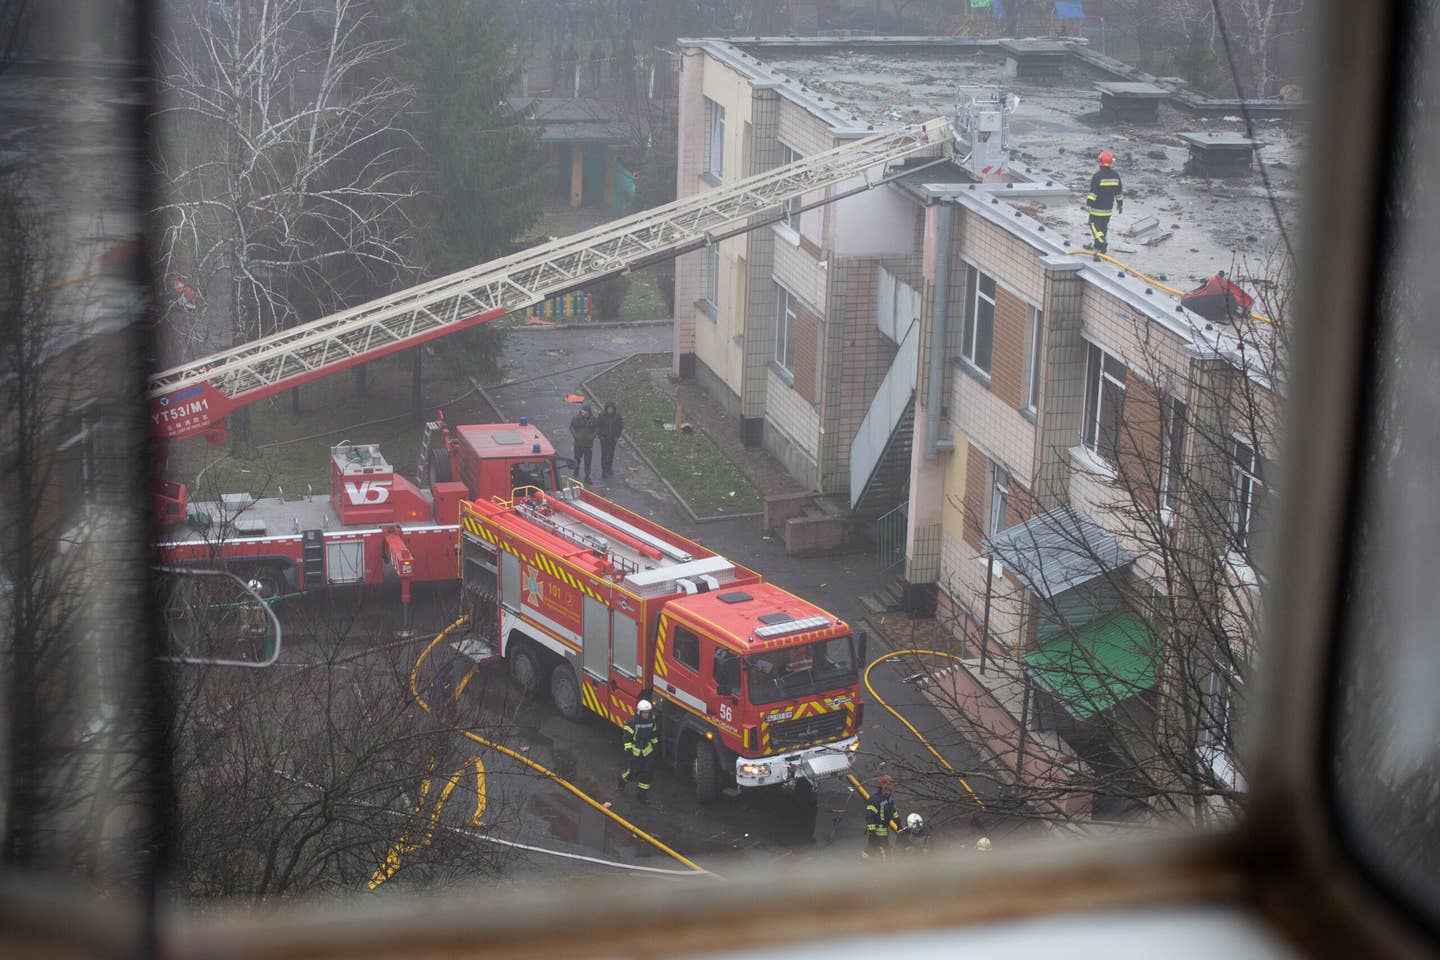 Firefighters work on the site where a helicopter crashed into a school in the city of Brovary outside of Kyiv. At least 17 people have been killed. <em>Photo by Oleksii Chumachenko/Anadolu Agency via Getty Images</em>